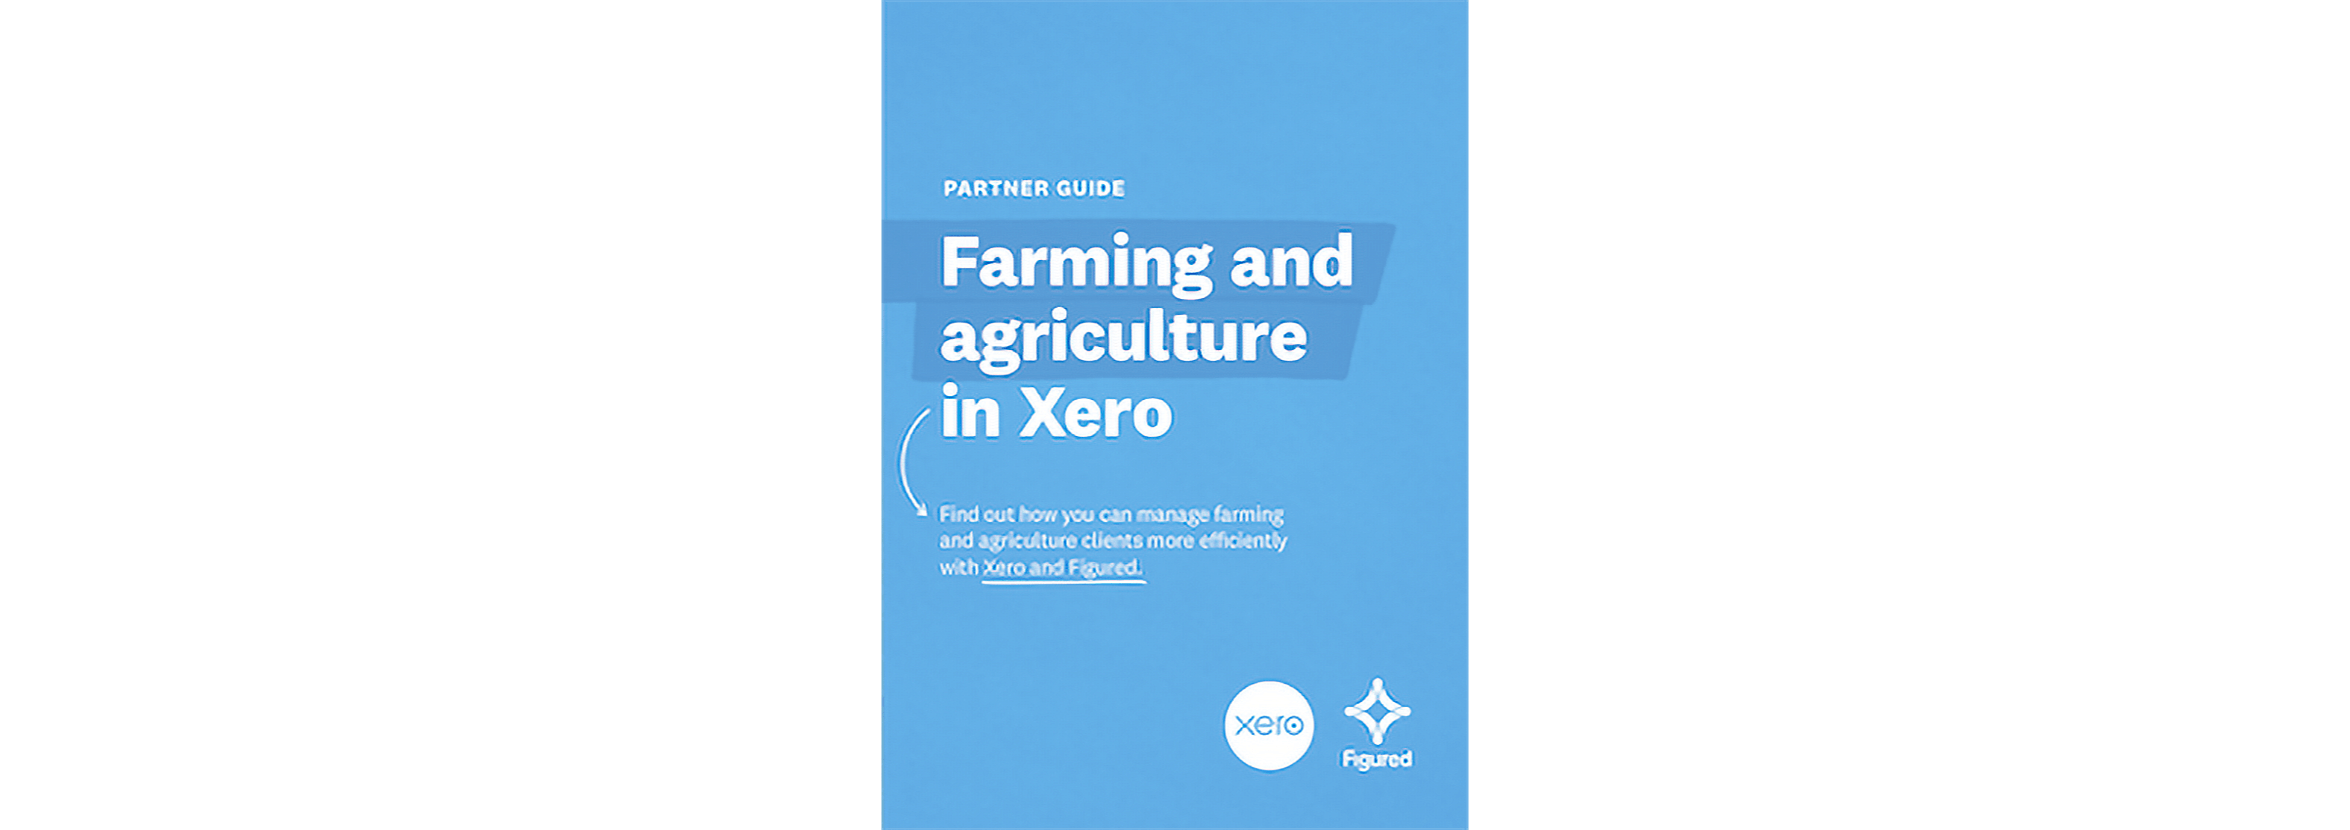 The cover of the partner guide entitled ‘Farming and agriculure in Xero’.